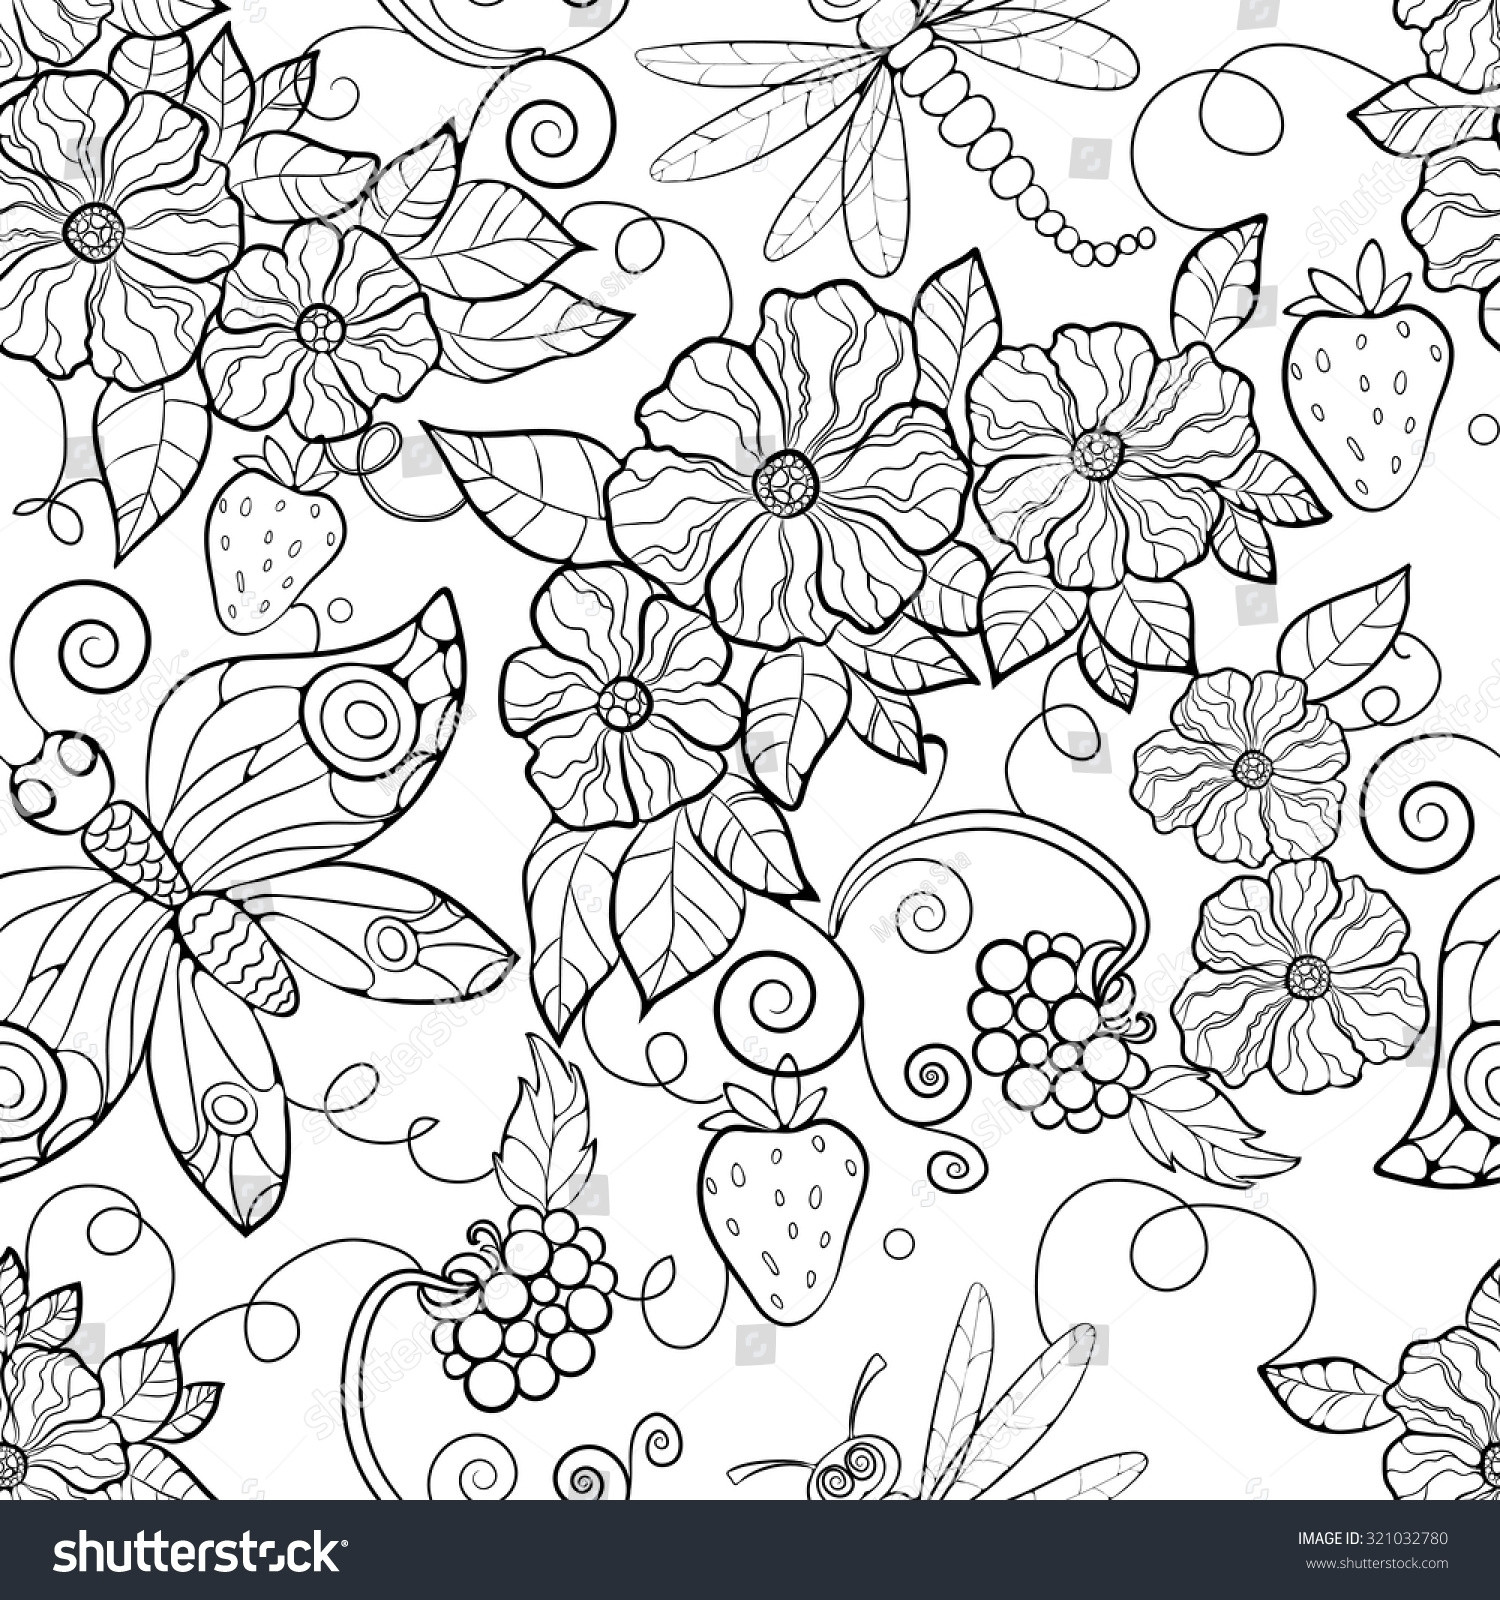 Flowers Coloring Pages For Adults
 Adult Coloring Pages Patterns Flowers at GetColorings